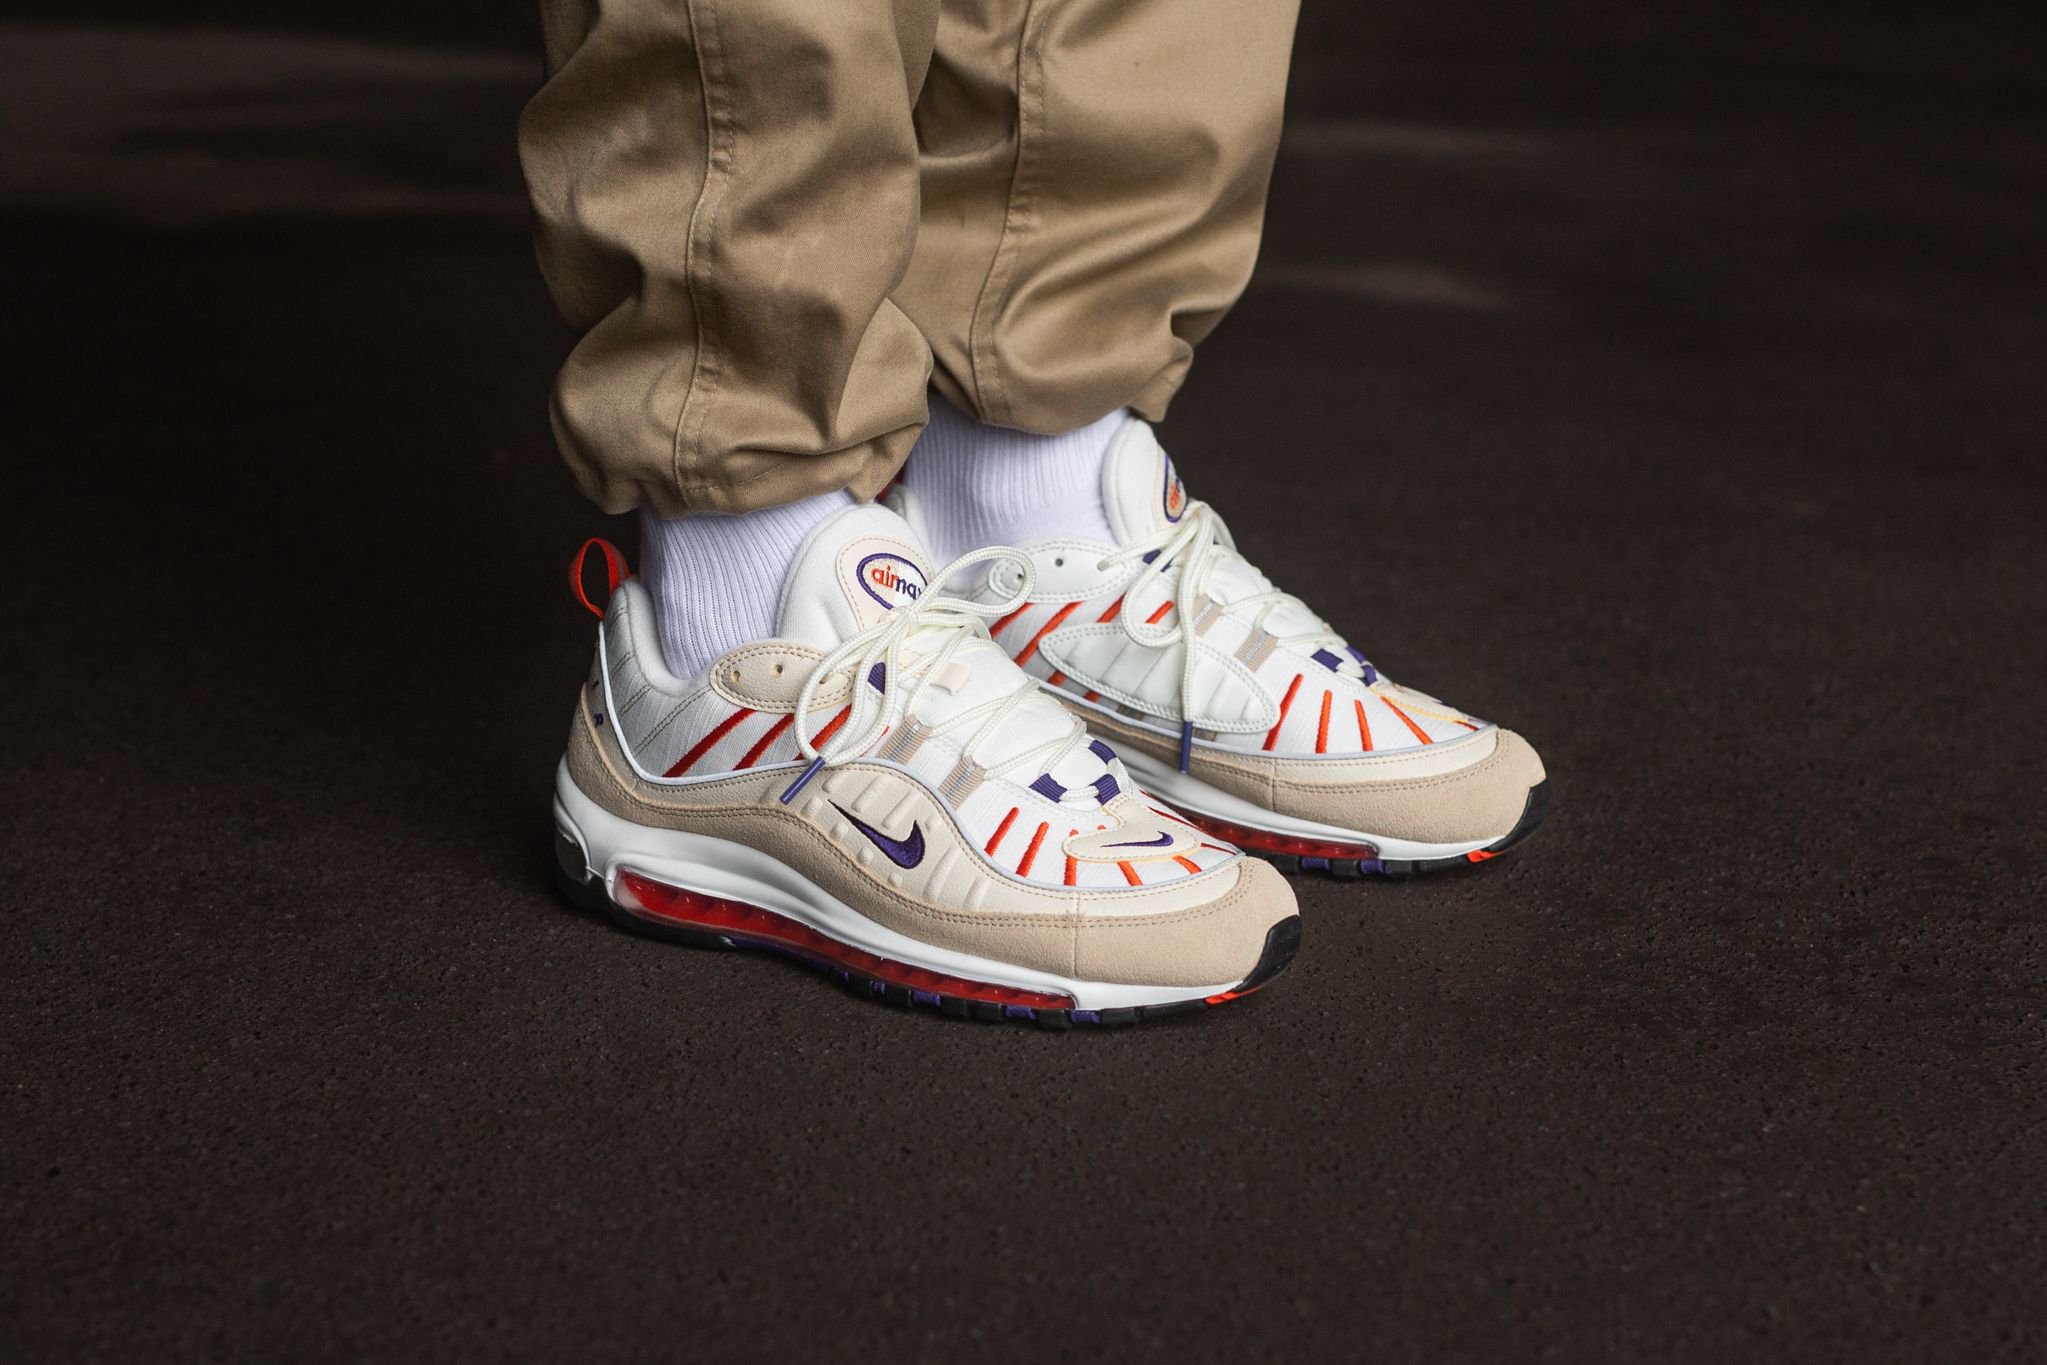 Titolo on Twitter: "OUT NOW 🔥 Nike Air Max 98 "Sail/Court Purple-Light Cream-Desert Ore" this way please ➡️ https://t.co/4j5q57Ooty US 7 - US 12 (46) style code 🔎 640744-108 #nike #nikeairmax98 #